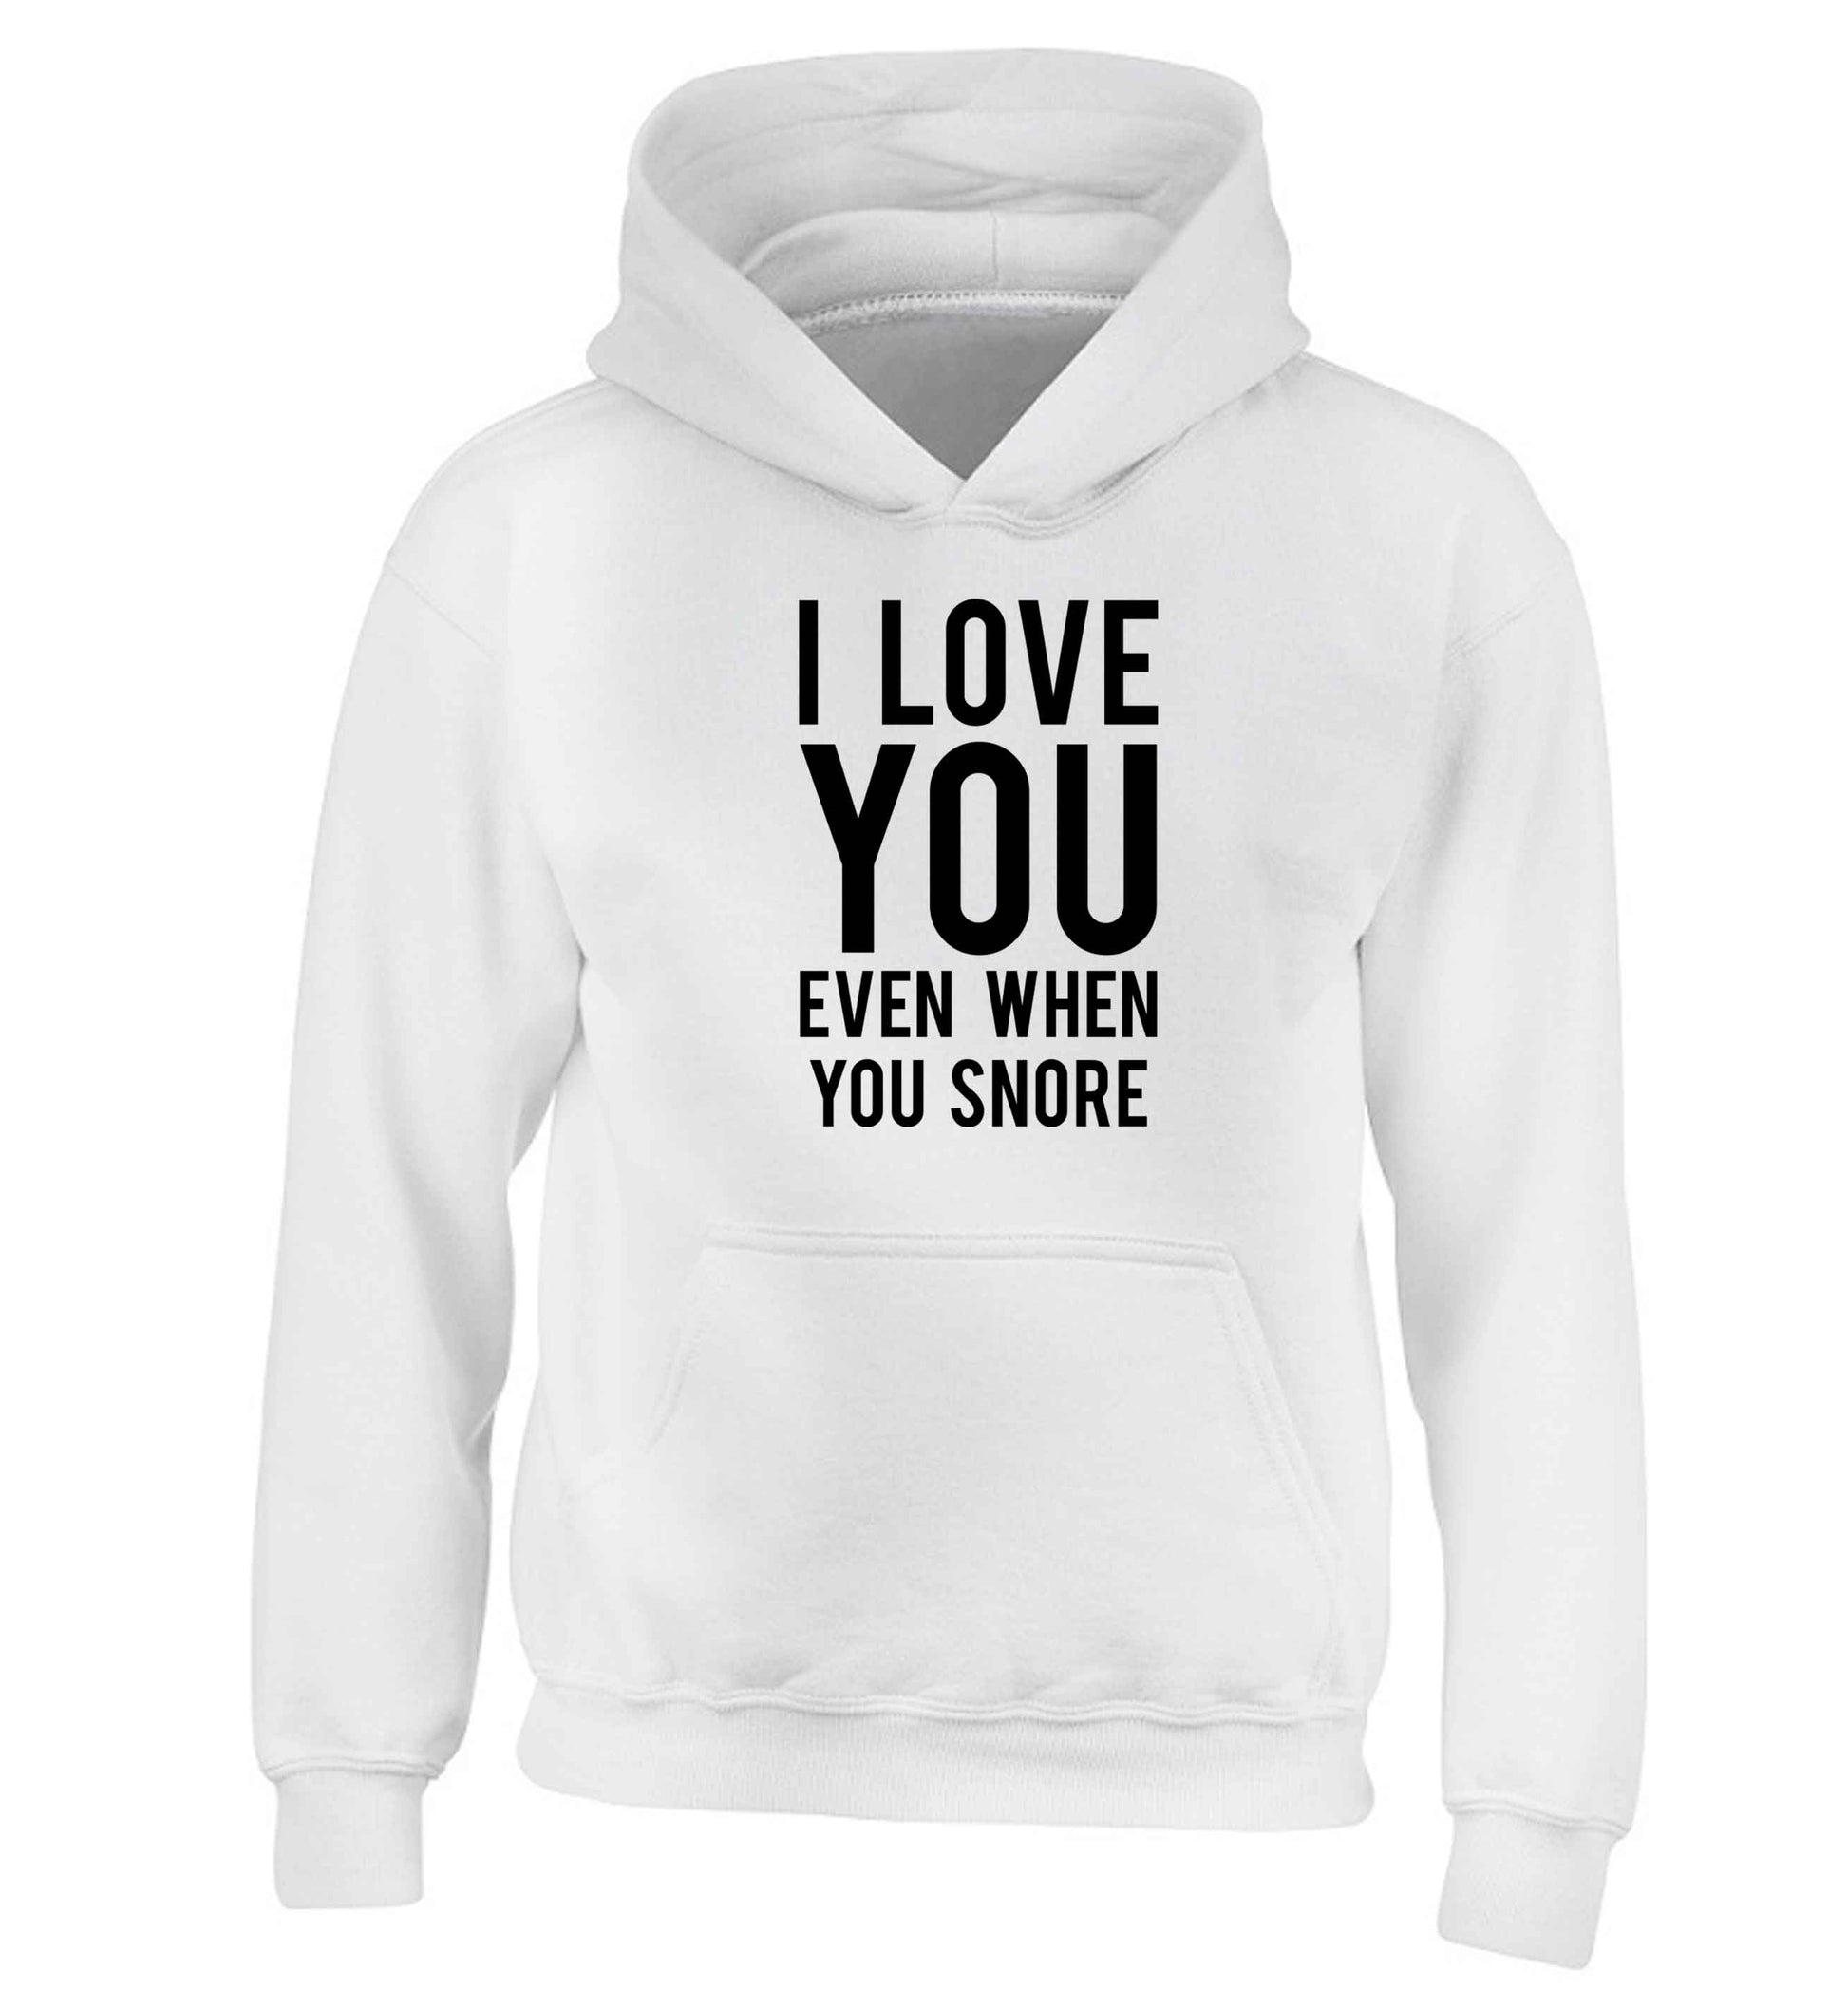 I love you even when you snore children's white hoodie 12-13 Years